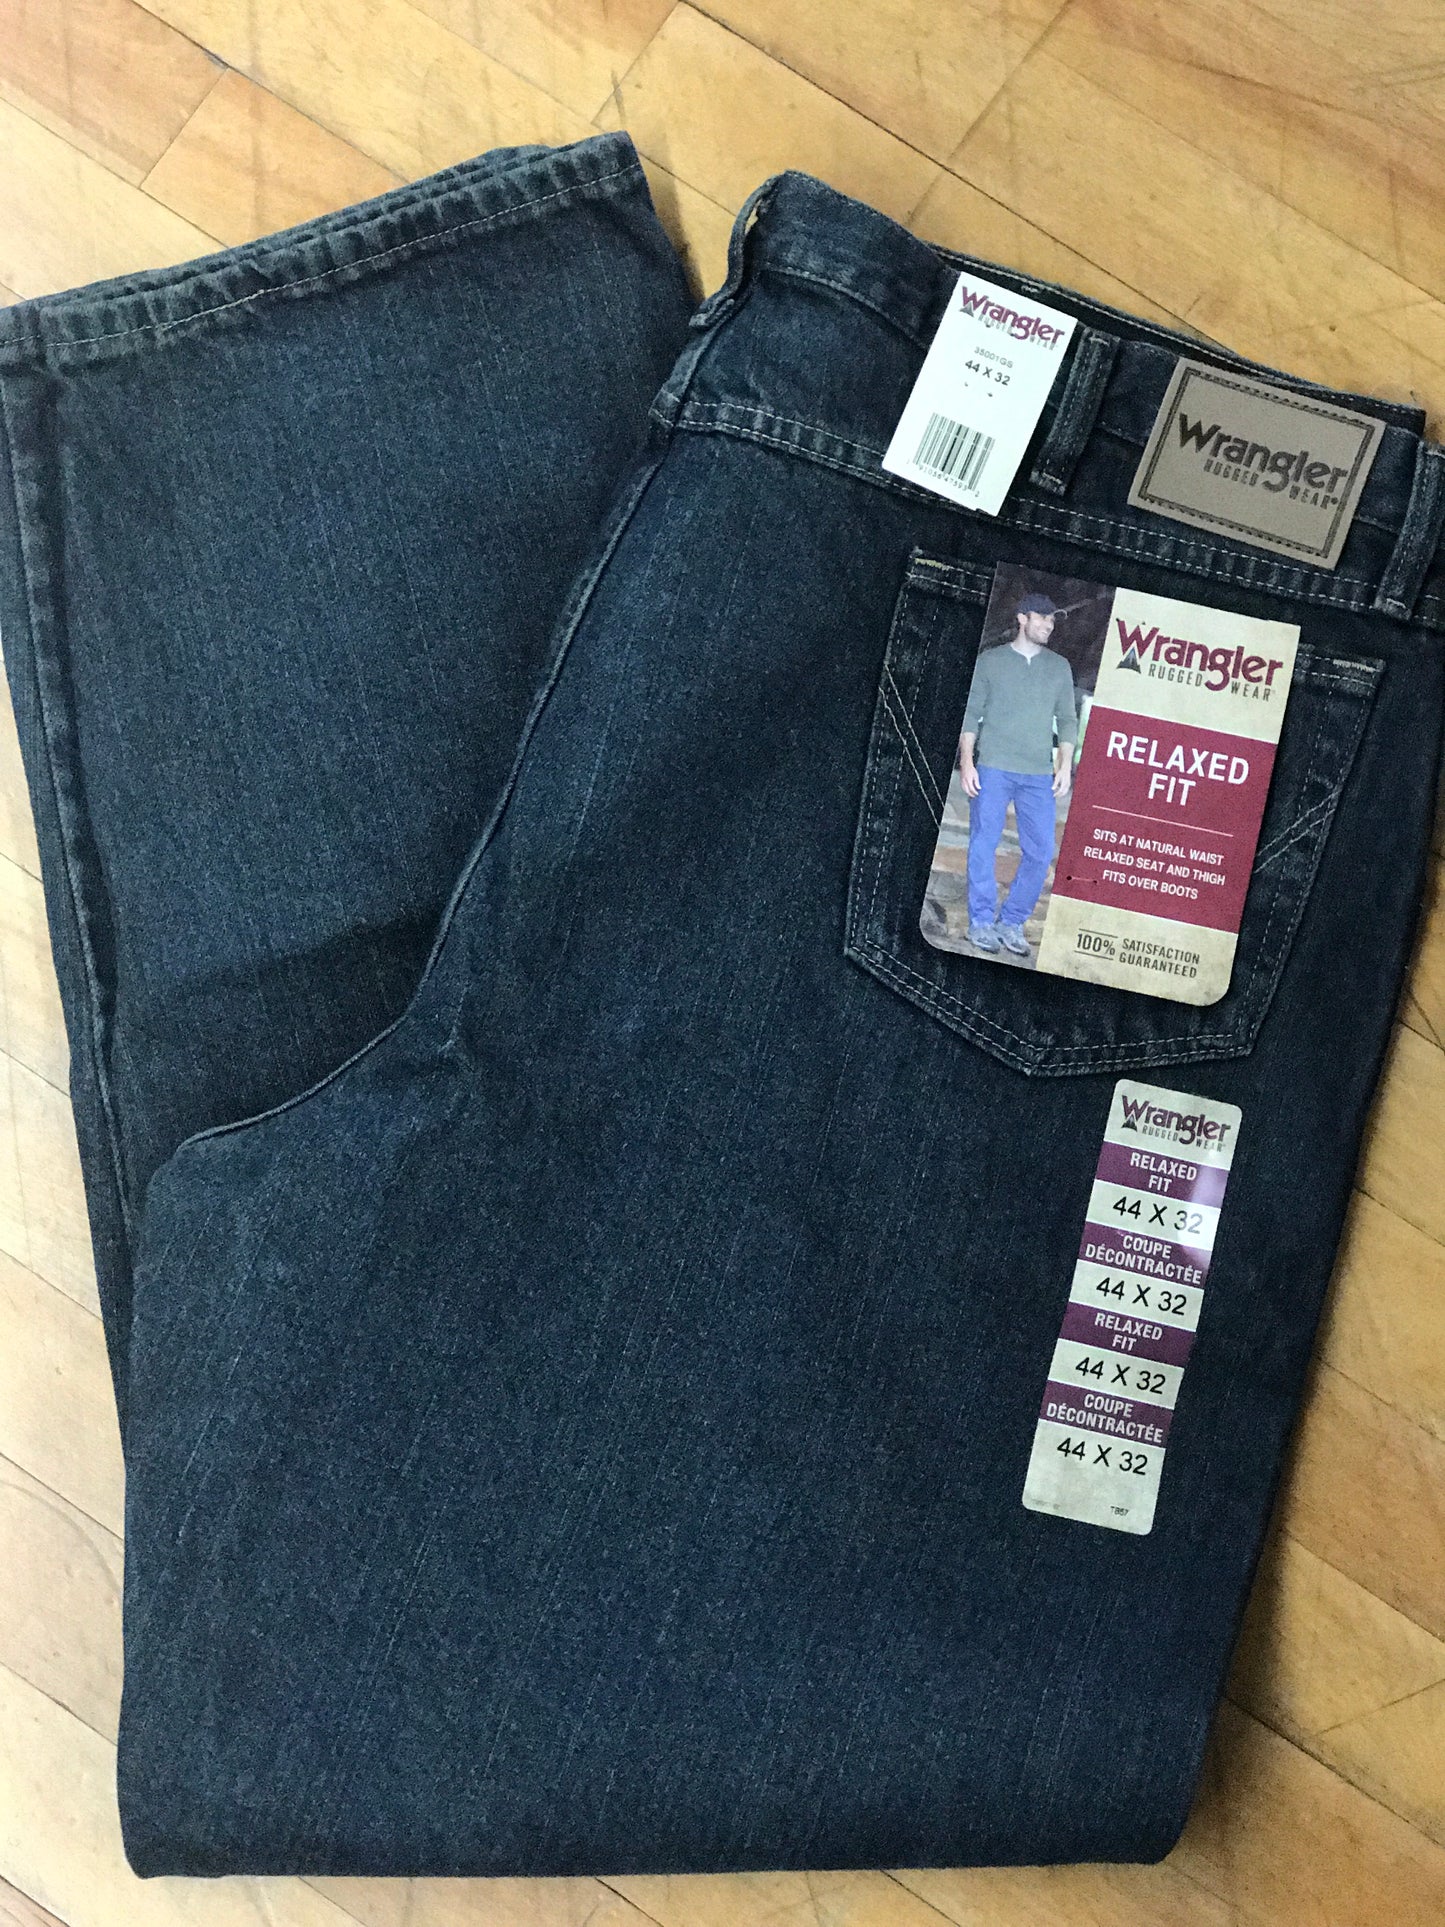 Wrangler Rugged Wear Relaxed Fit Jeans